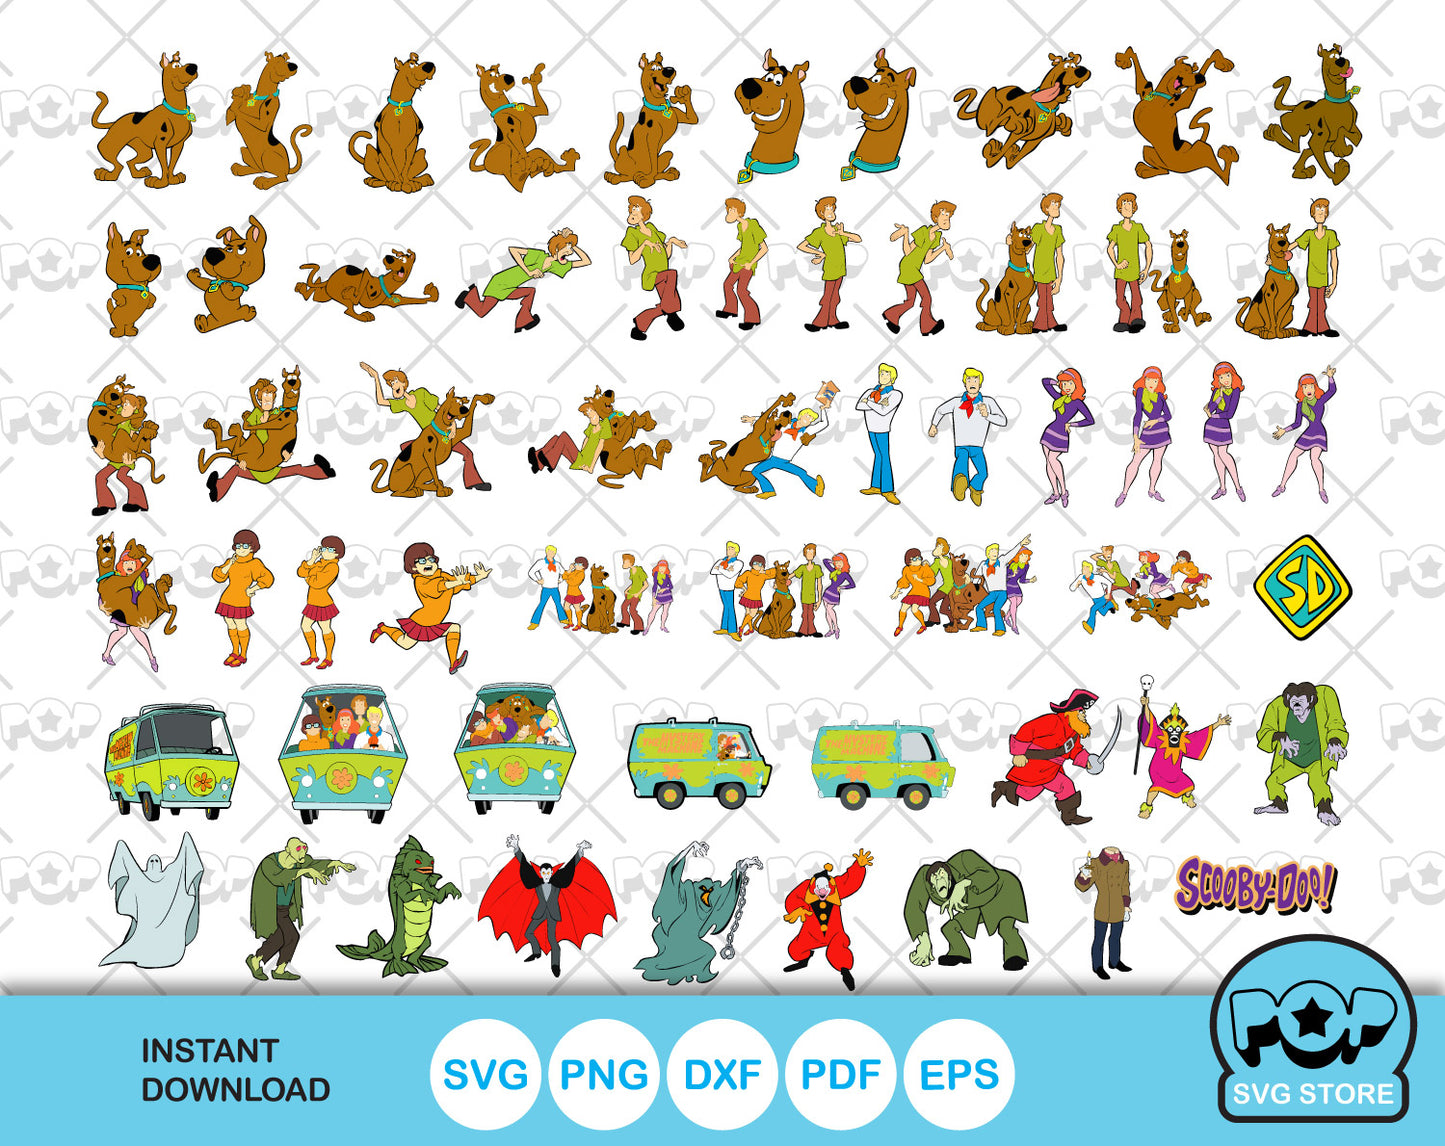 Scooby-Doo clipart bundle, Scooby Doo SVG cut files for Cricut / Silhouette, PNG, DXF, instant download